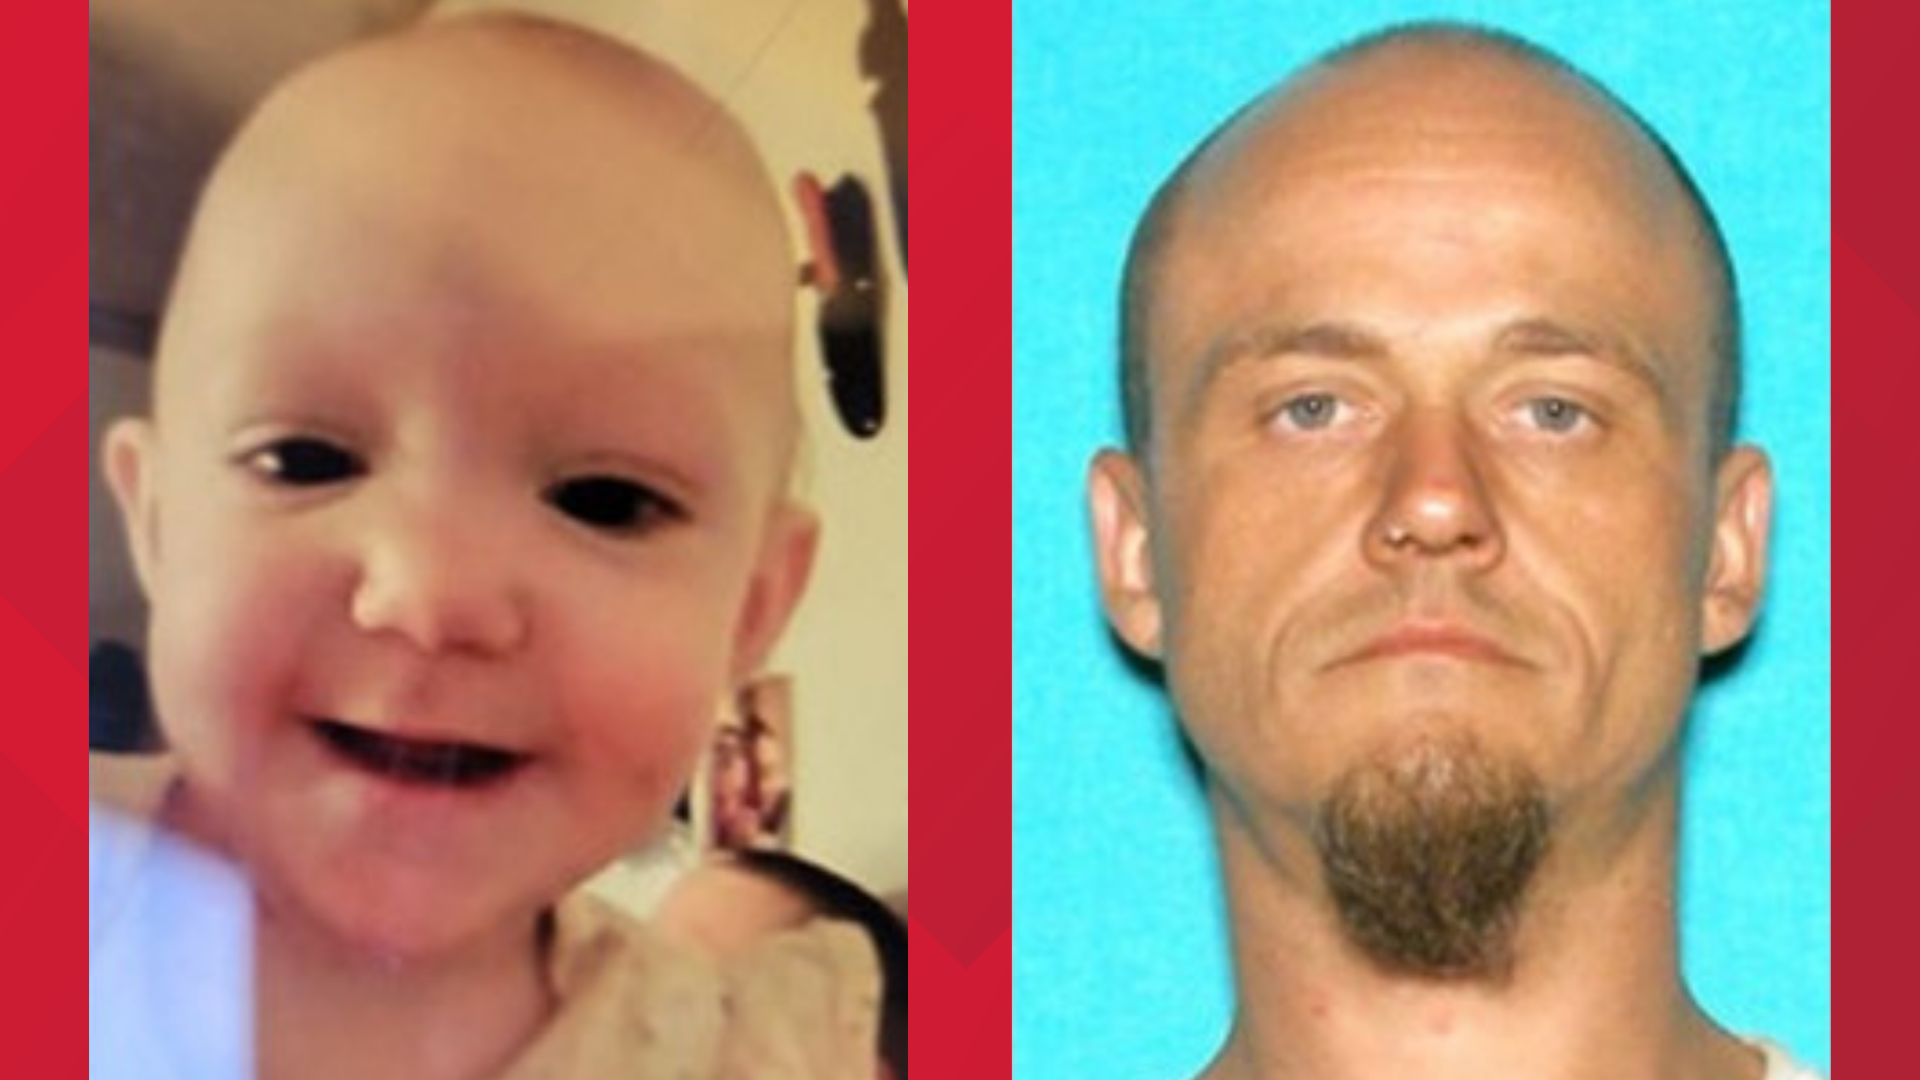 Justin Miller is charged with murder in the death of 11-month-old Mercedes Lain, who was found dead in the woods in Starke County.